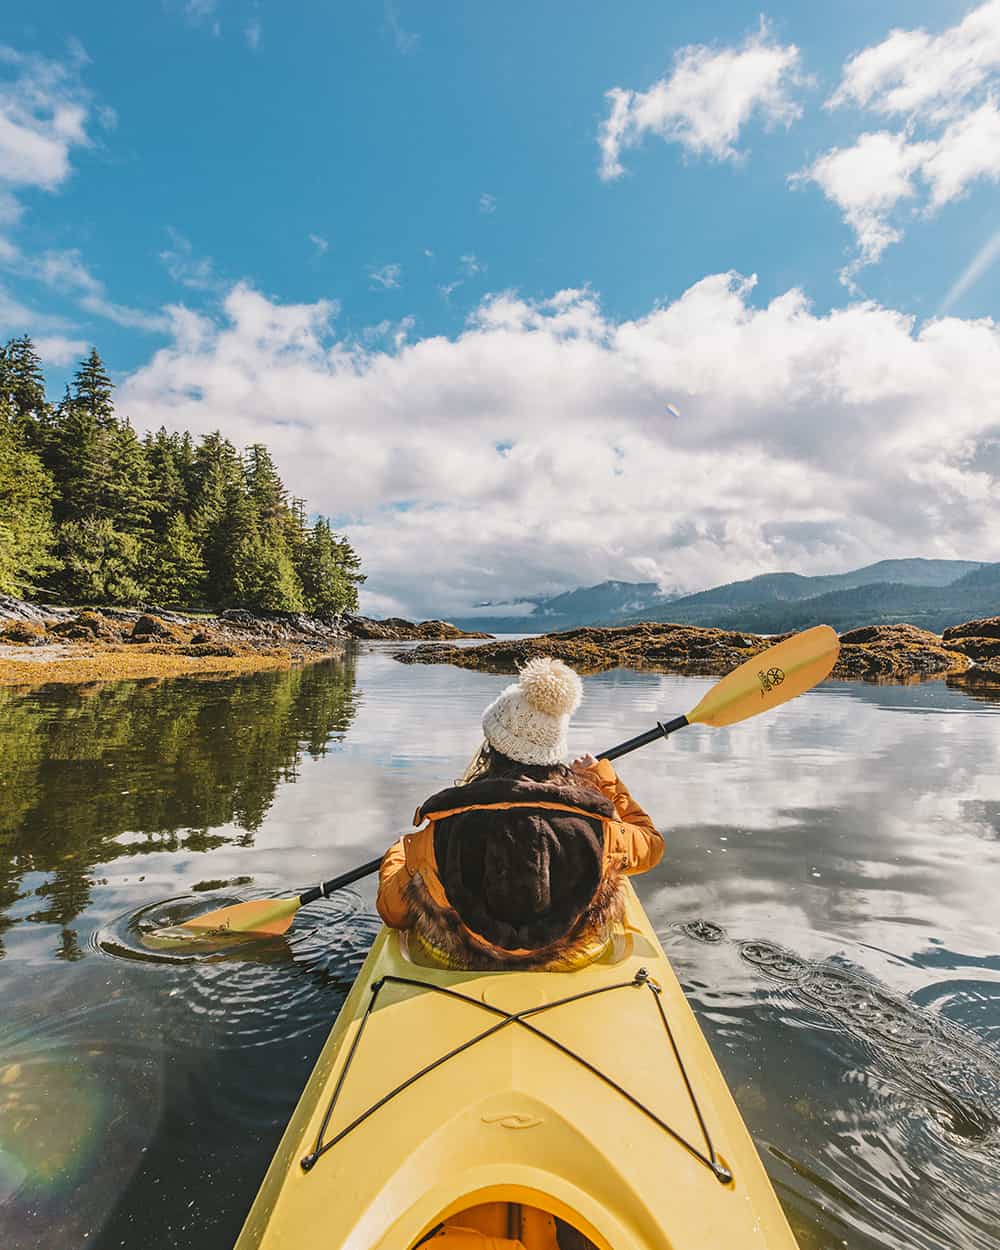 Sea kayaking in the Tongass National Forest in Alaska